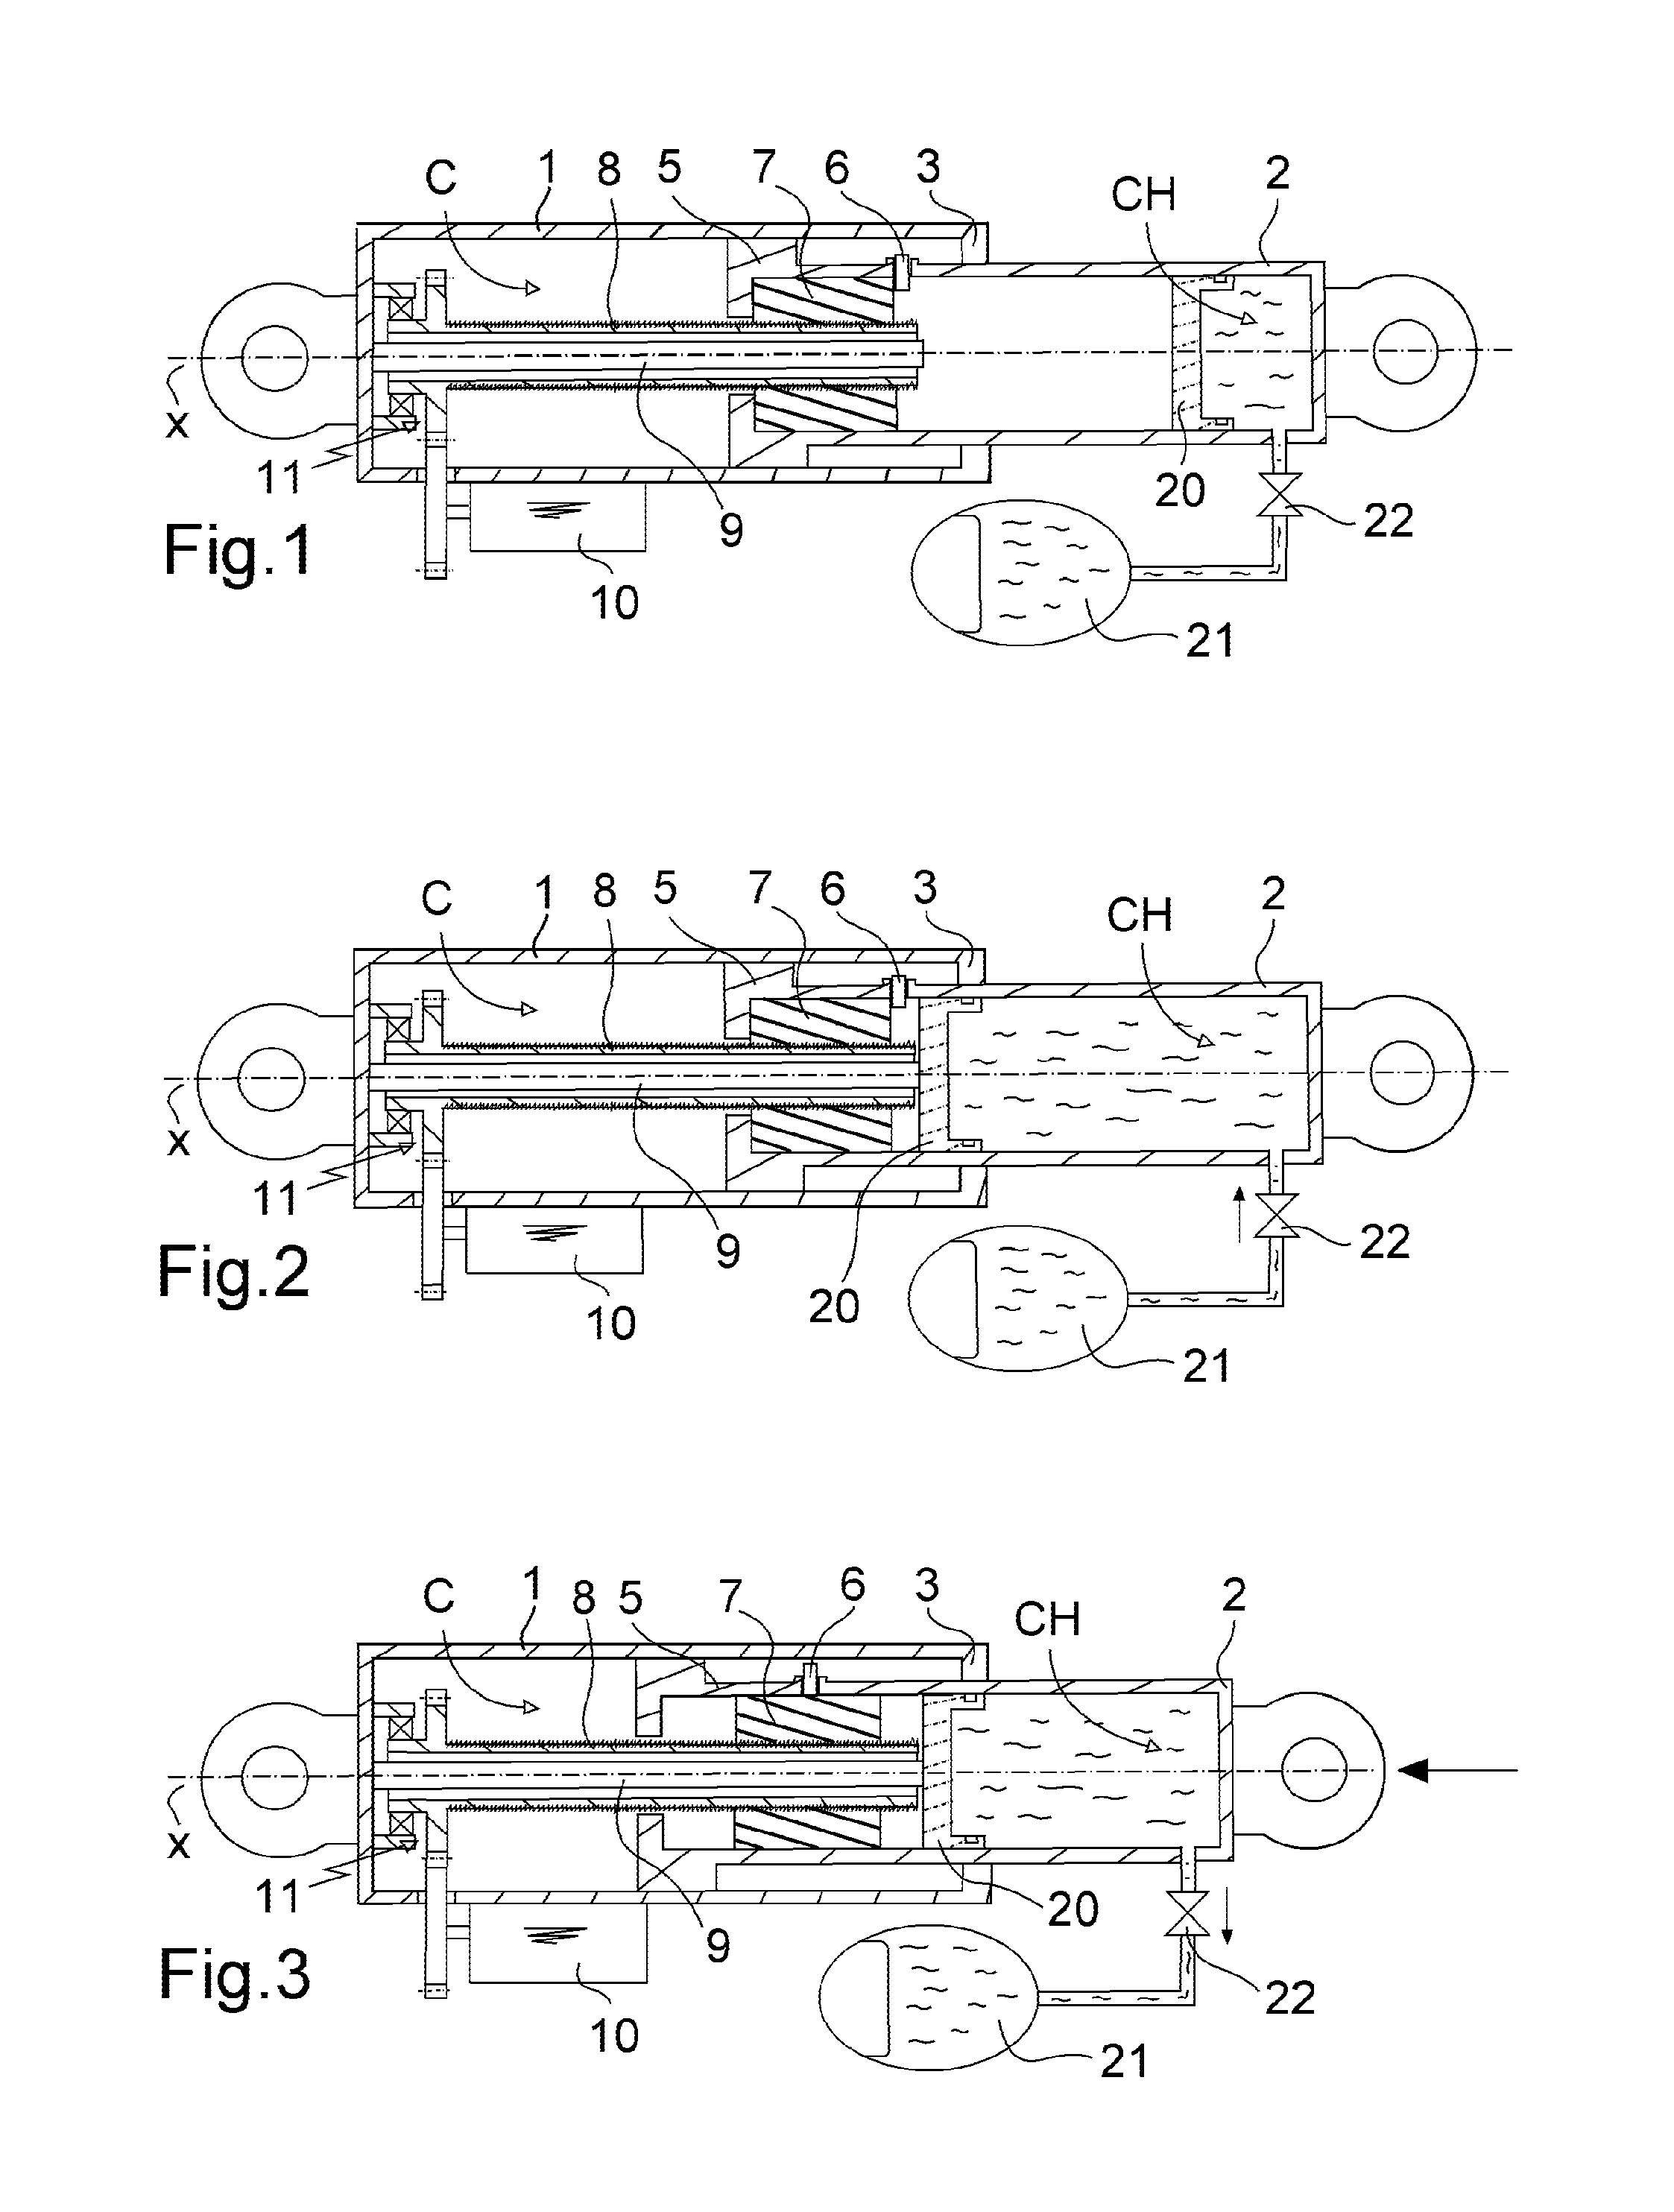 Mechanical actuator with a hydraulic damper device